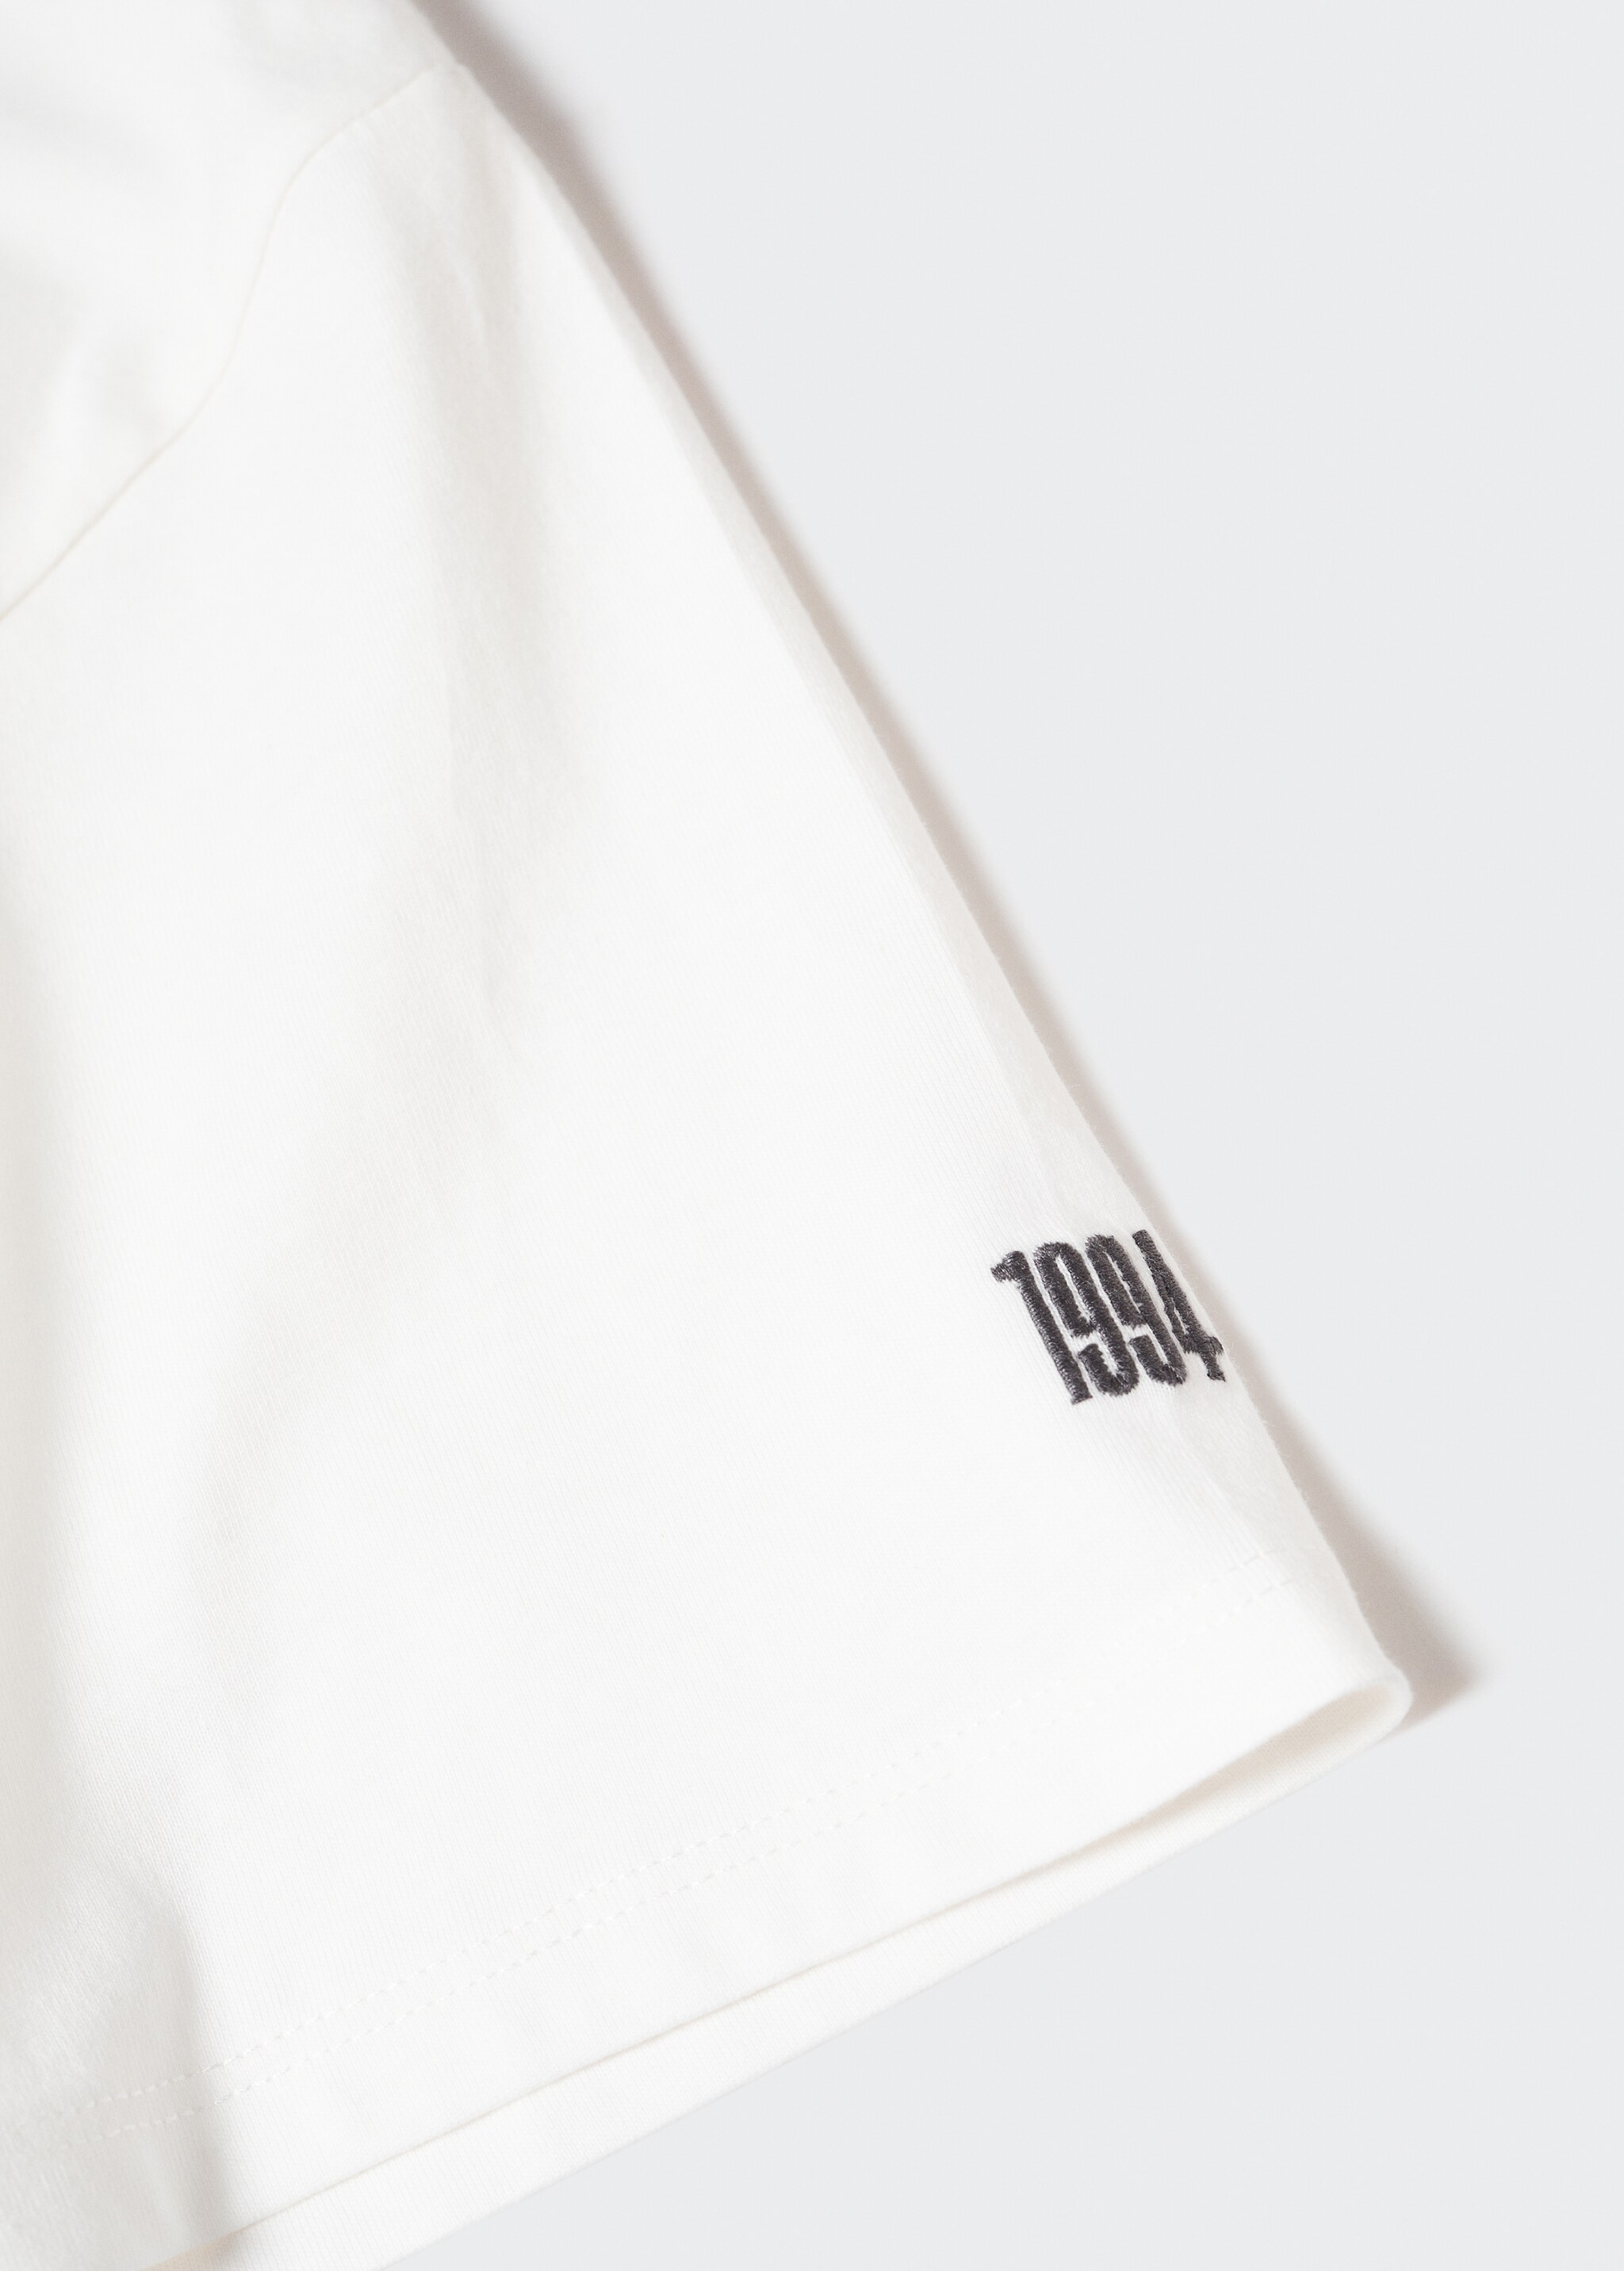 Embroidered message T-shirt - Details of the article 8